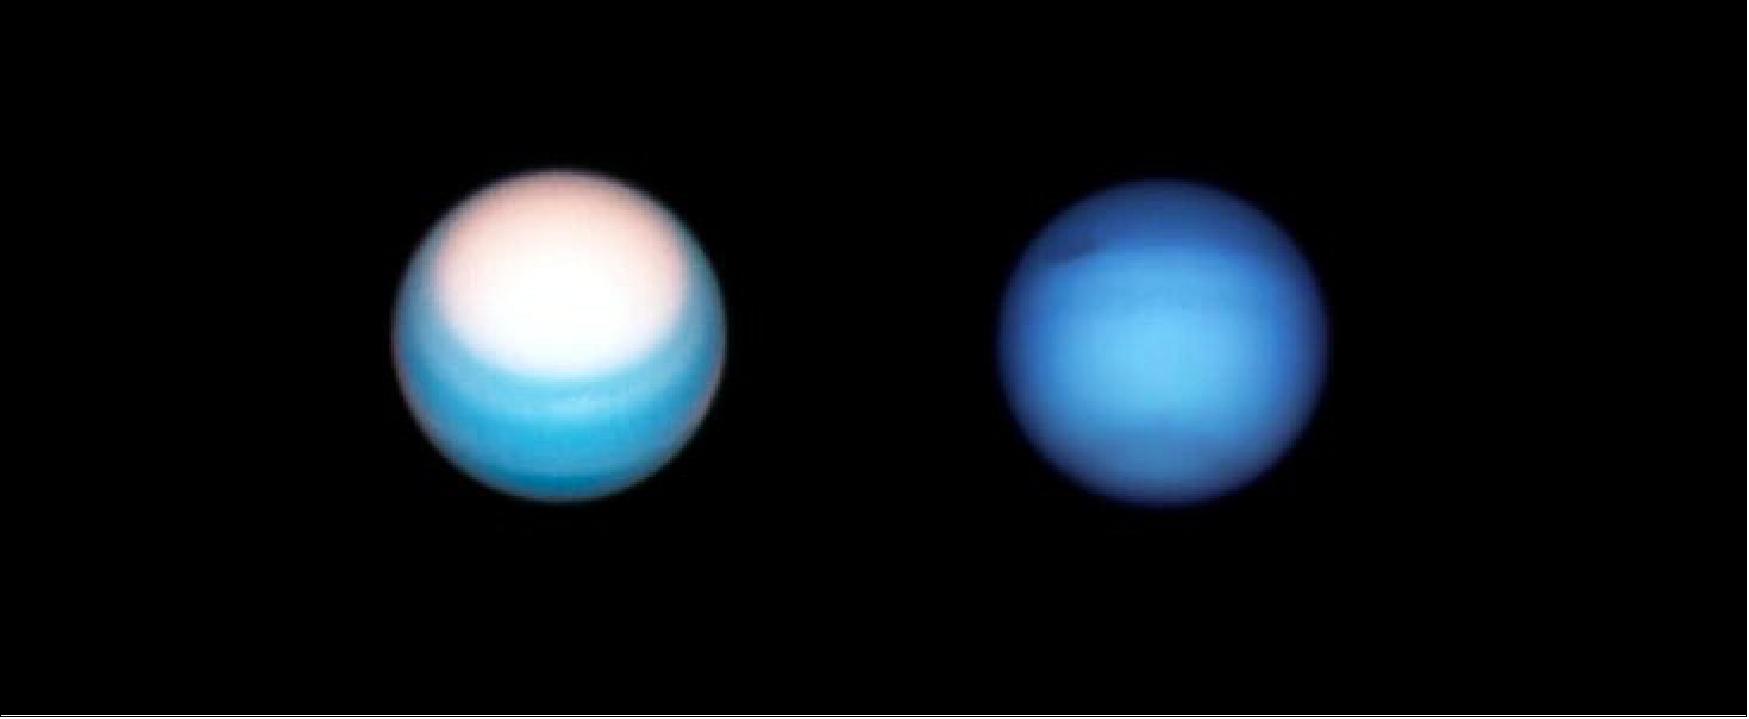 Figure 26: Astronomers may now know why Uranus and Neptune are different colours. Using observations from the NASA/ESA Hubble Space Telescope, as well as the Gemini North telescope and the NASA Infrared Telescope Facility, researchers have developed a single atmospheric model that matches observations of both planets. The model reveals that excess haze on Uranus builds up in the planet’s stagnant, sluggish atmosphere and makes it appear a lighter tone than Neptune. — Left: Hubble’s 25 October 2021 view of Uranus puts the planet’s bright northern polar hood in the spotlight. Right: Hubble’s 7 September 2021 view of Neptune features the planet’s dark spot and darkened northern hemisphere (image credit: NASA, ESA, A. Simon (Goddard Space Flight Center), and M. H. Wong (University of California, Berkeley) and the OPAL team)